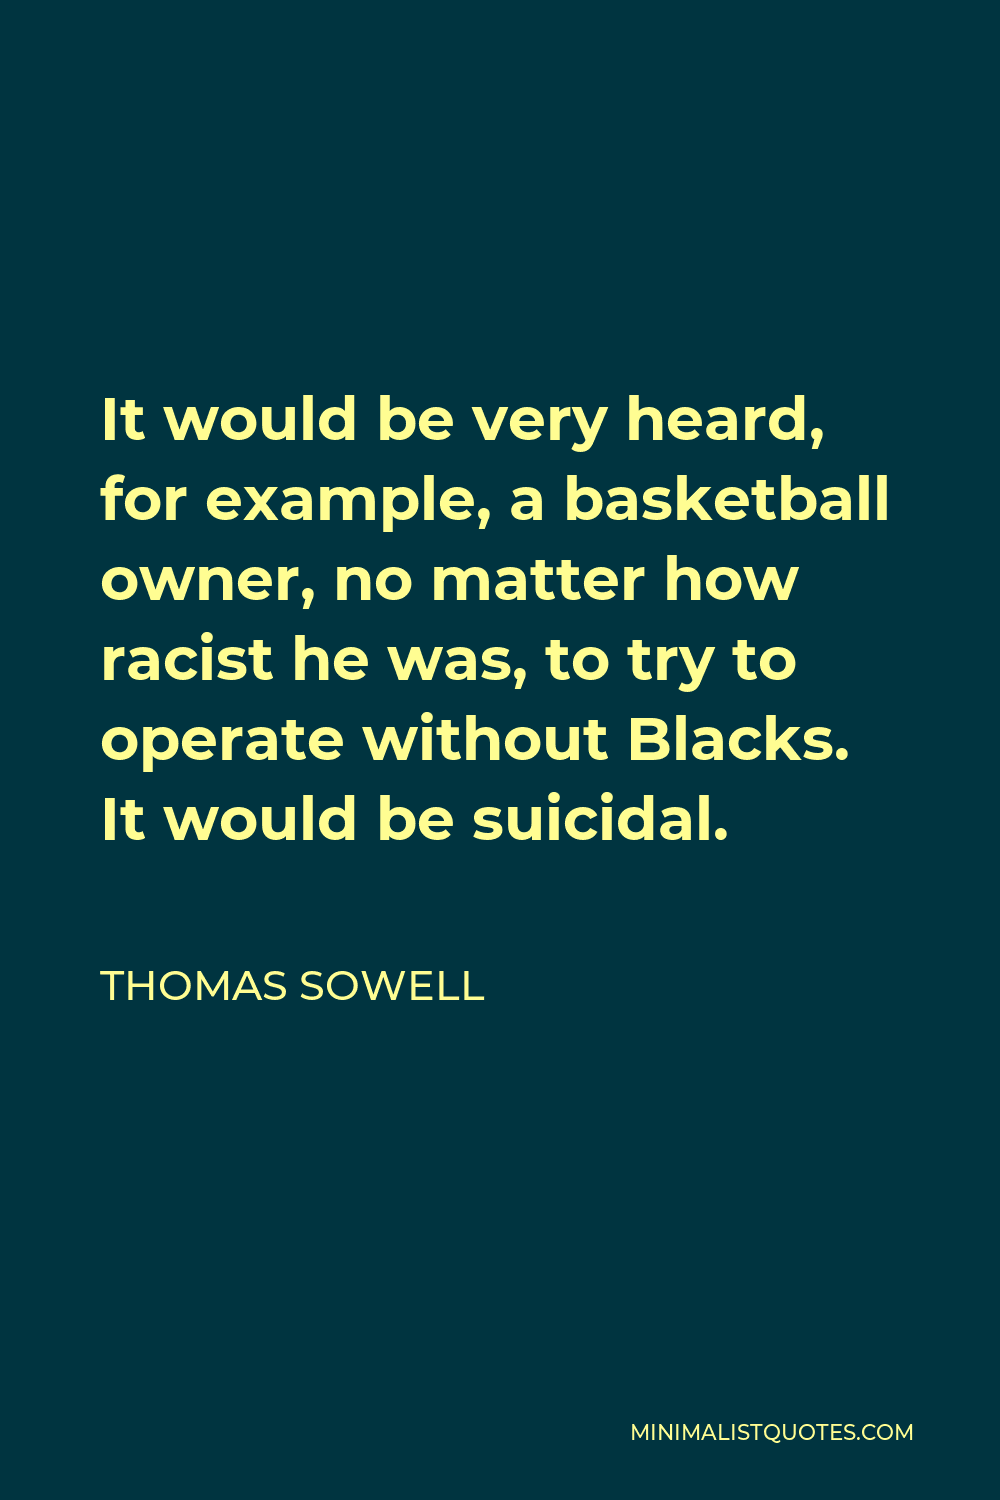 Thomas Sowell Quote - It would be very heard, for example, a basketball owner, no matter how racist he was, to try to operate without Blacks. It would be suicidal.